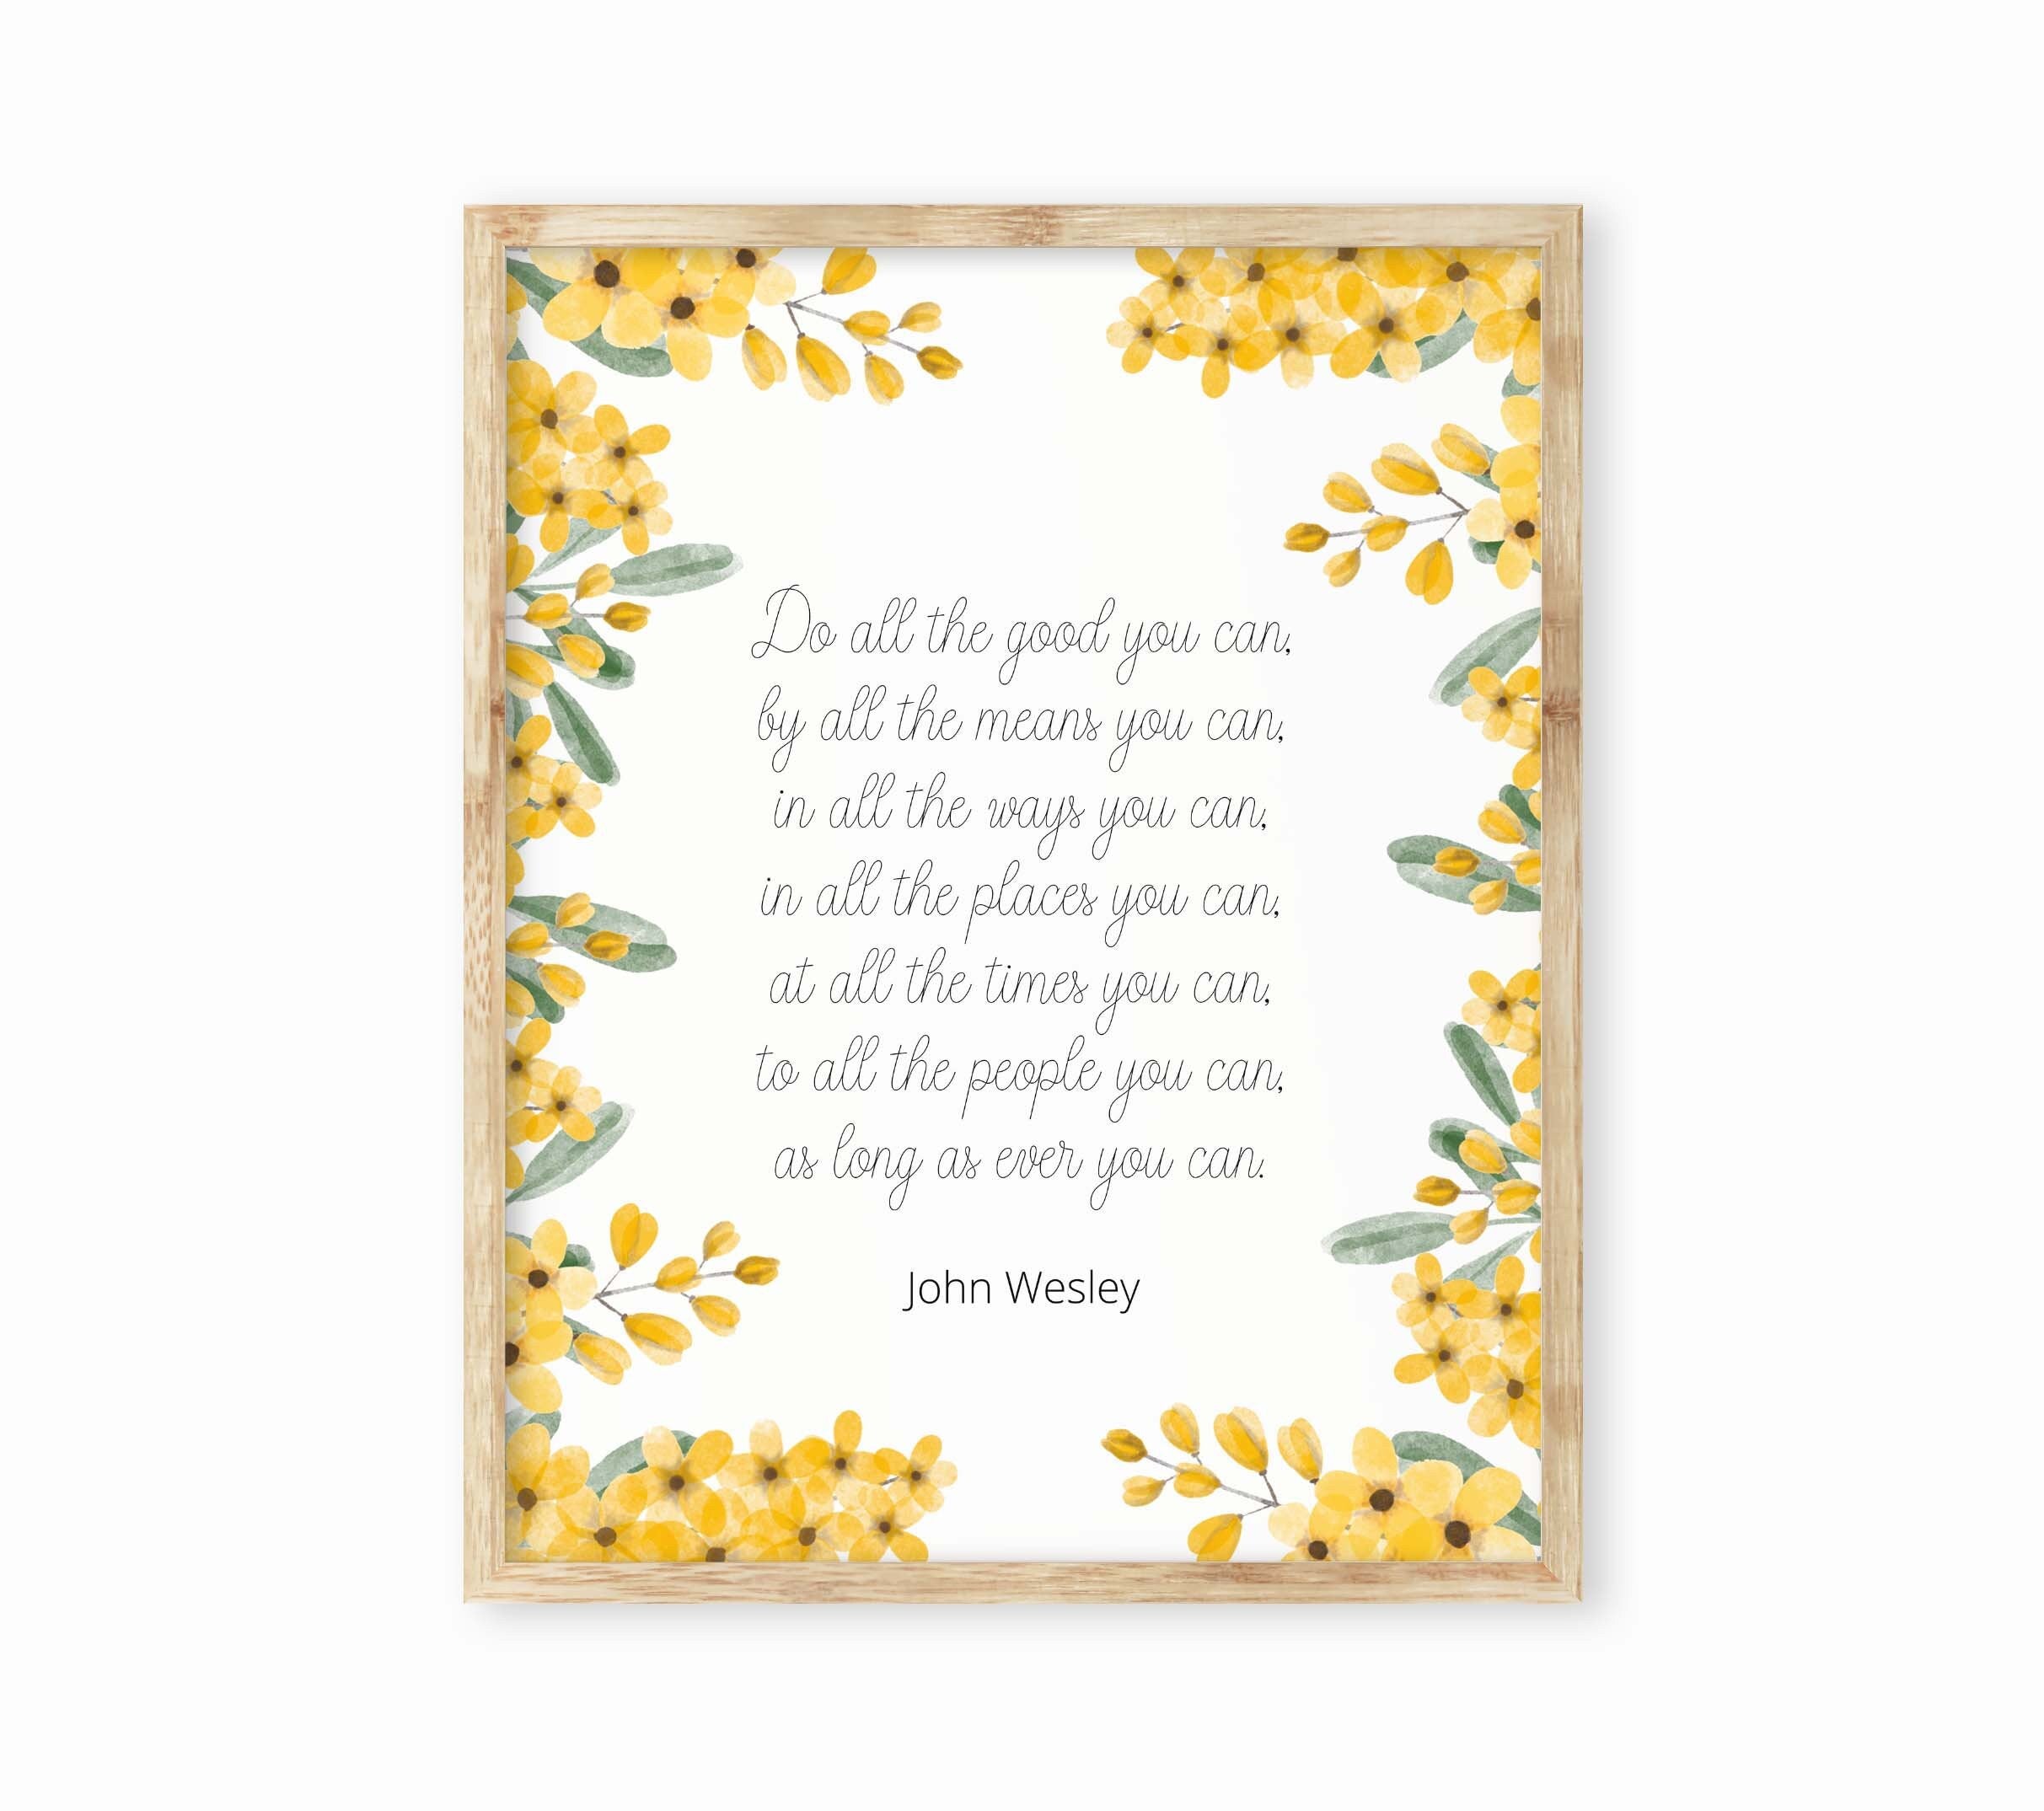 Do All The Good You Can Quote Print in White and Yellow, John Wesley Inspirational Quote Wall Art Print Unframed or Framed Art